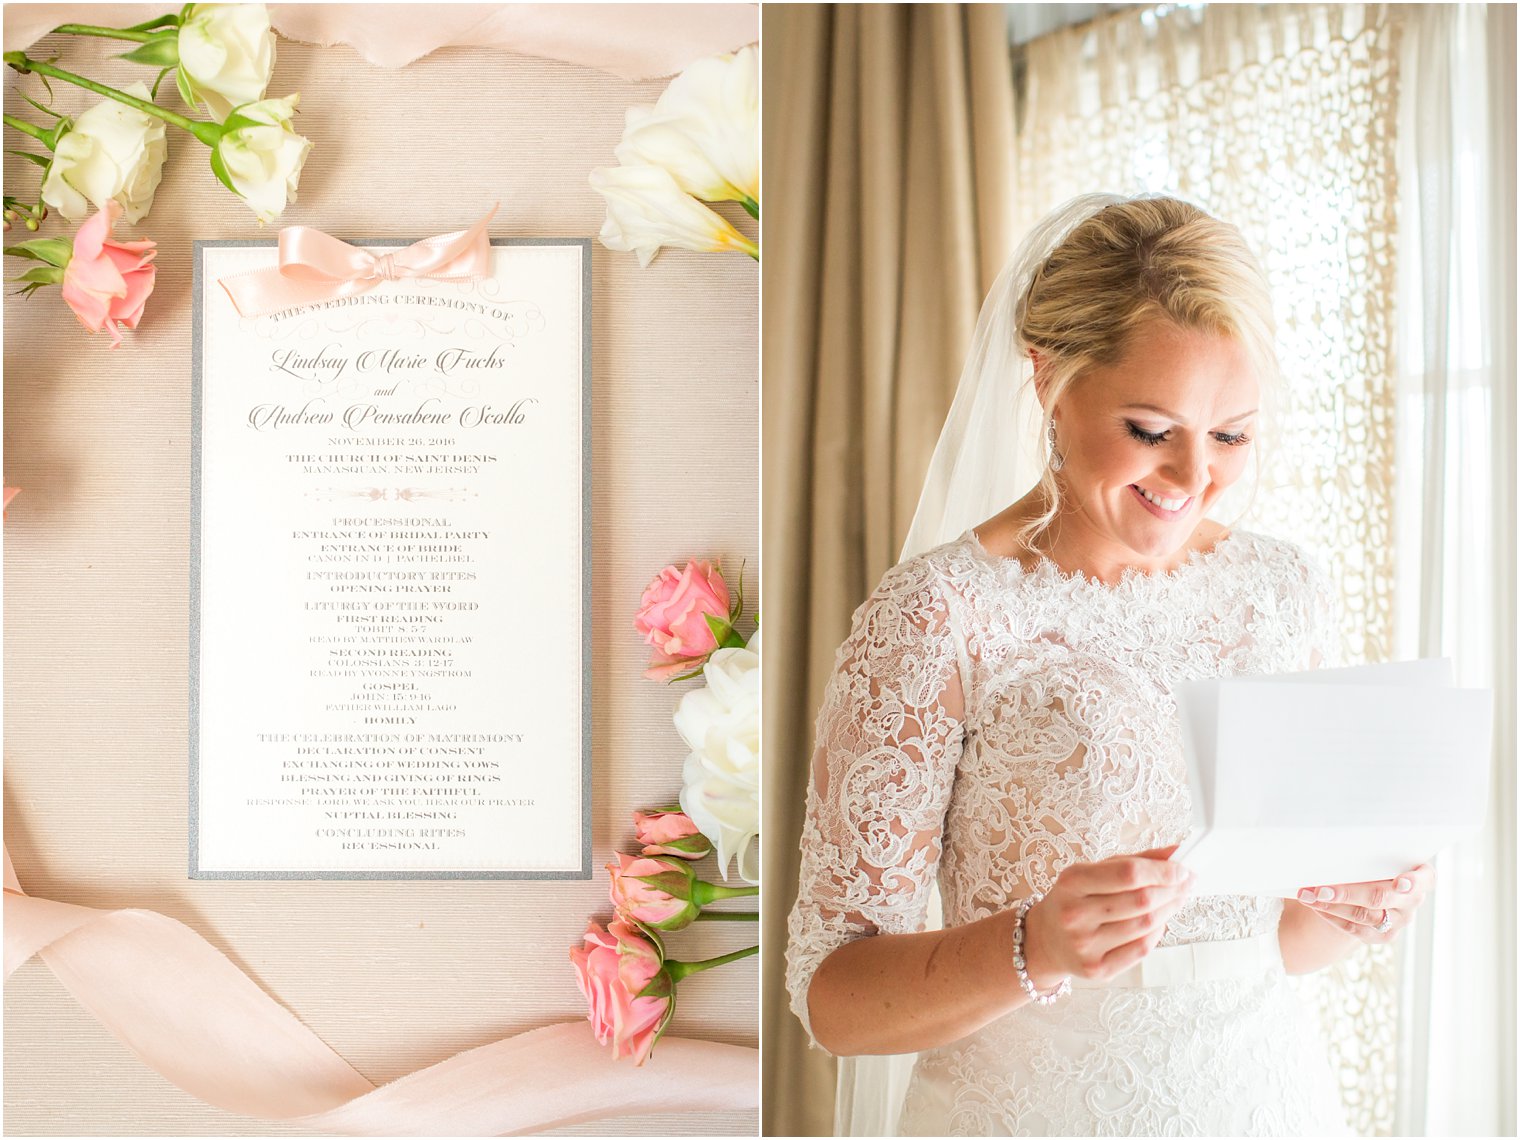 Bride reading letter from groom | Photo by Idalia Photography